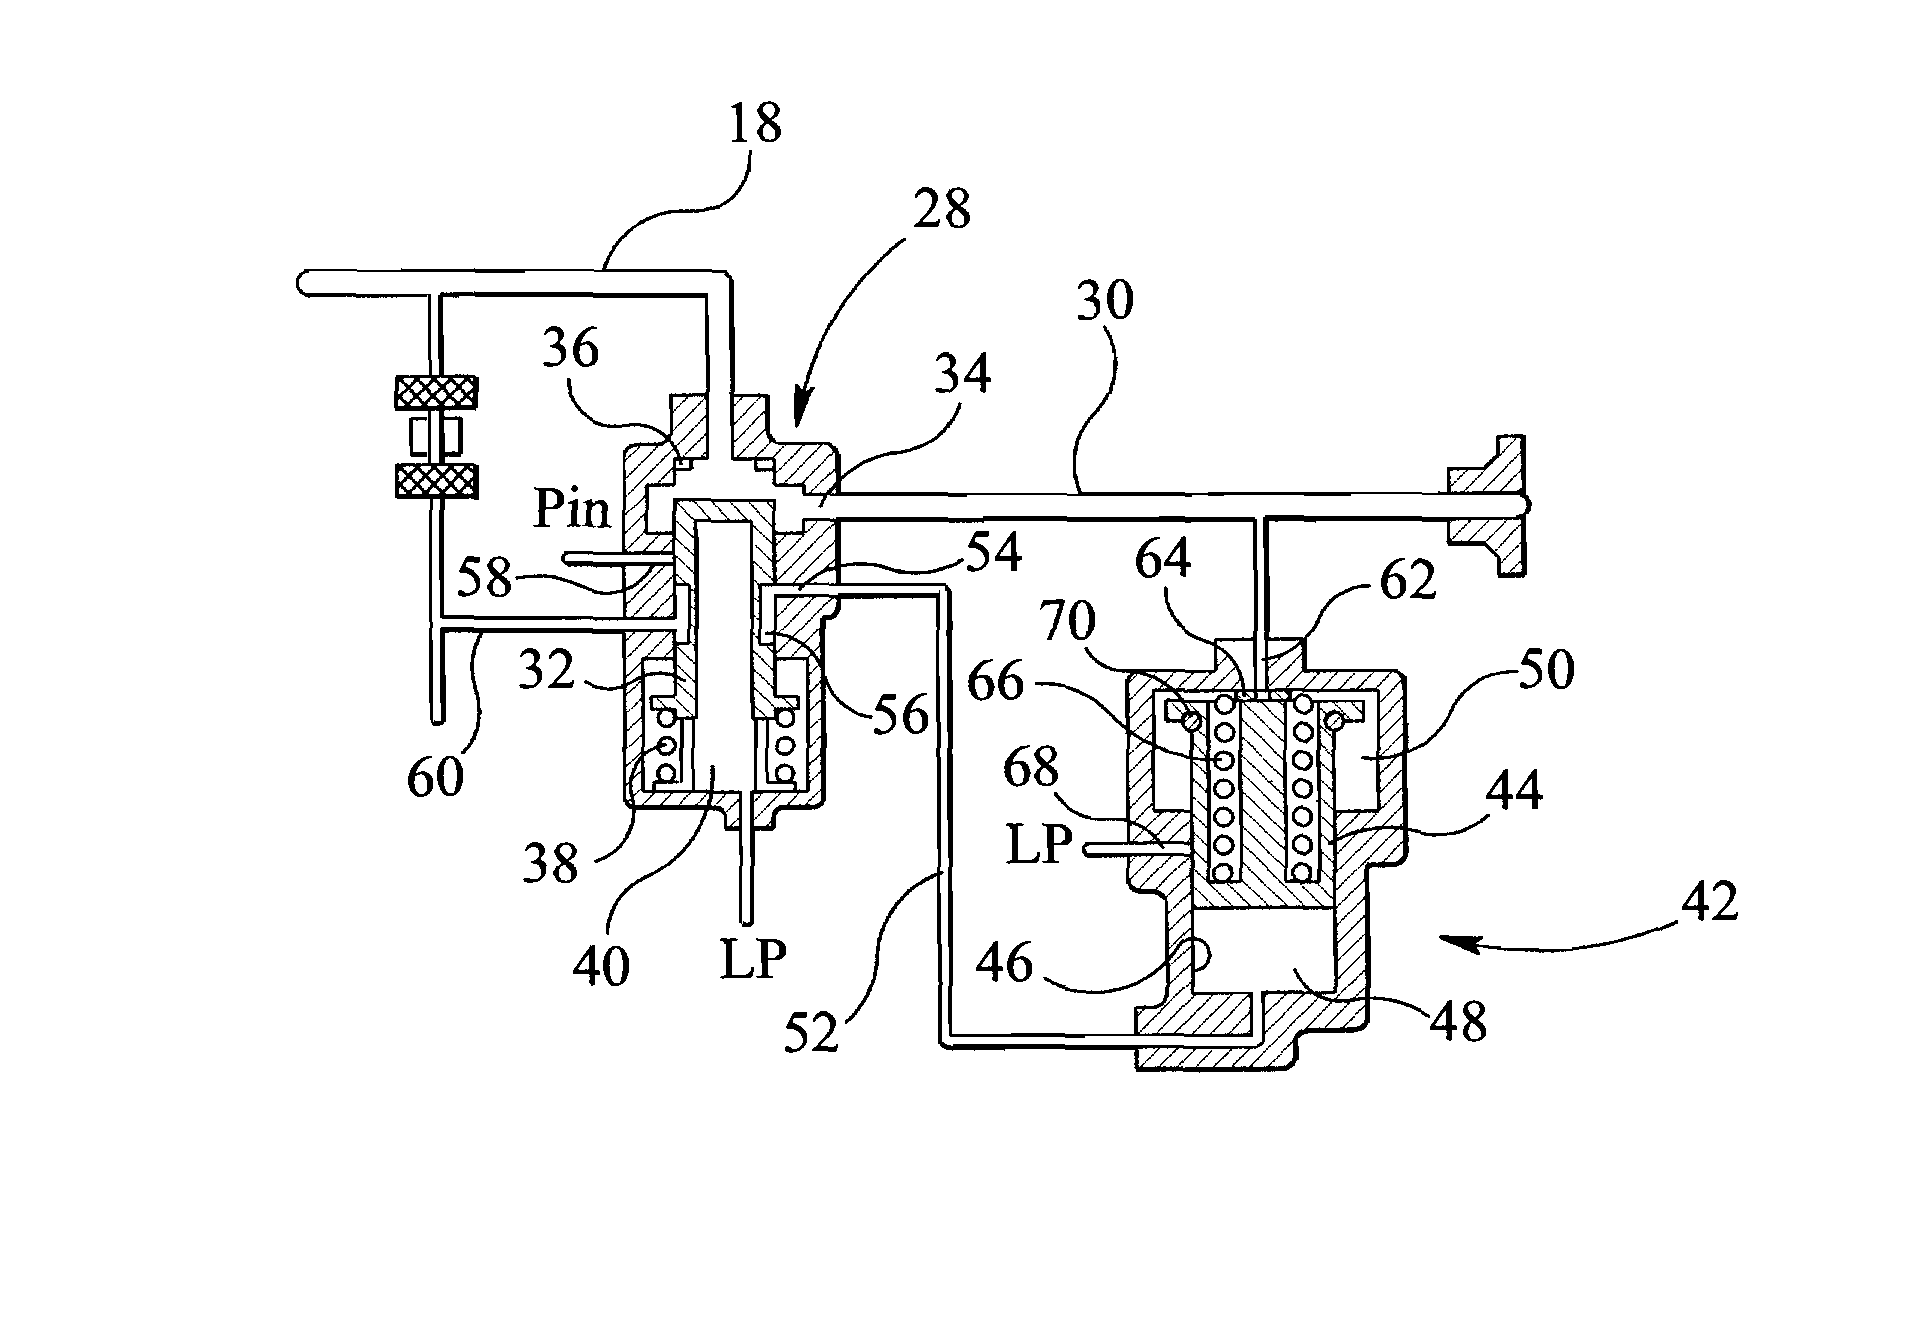 Fuel system and ecology valve for use therein